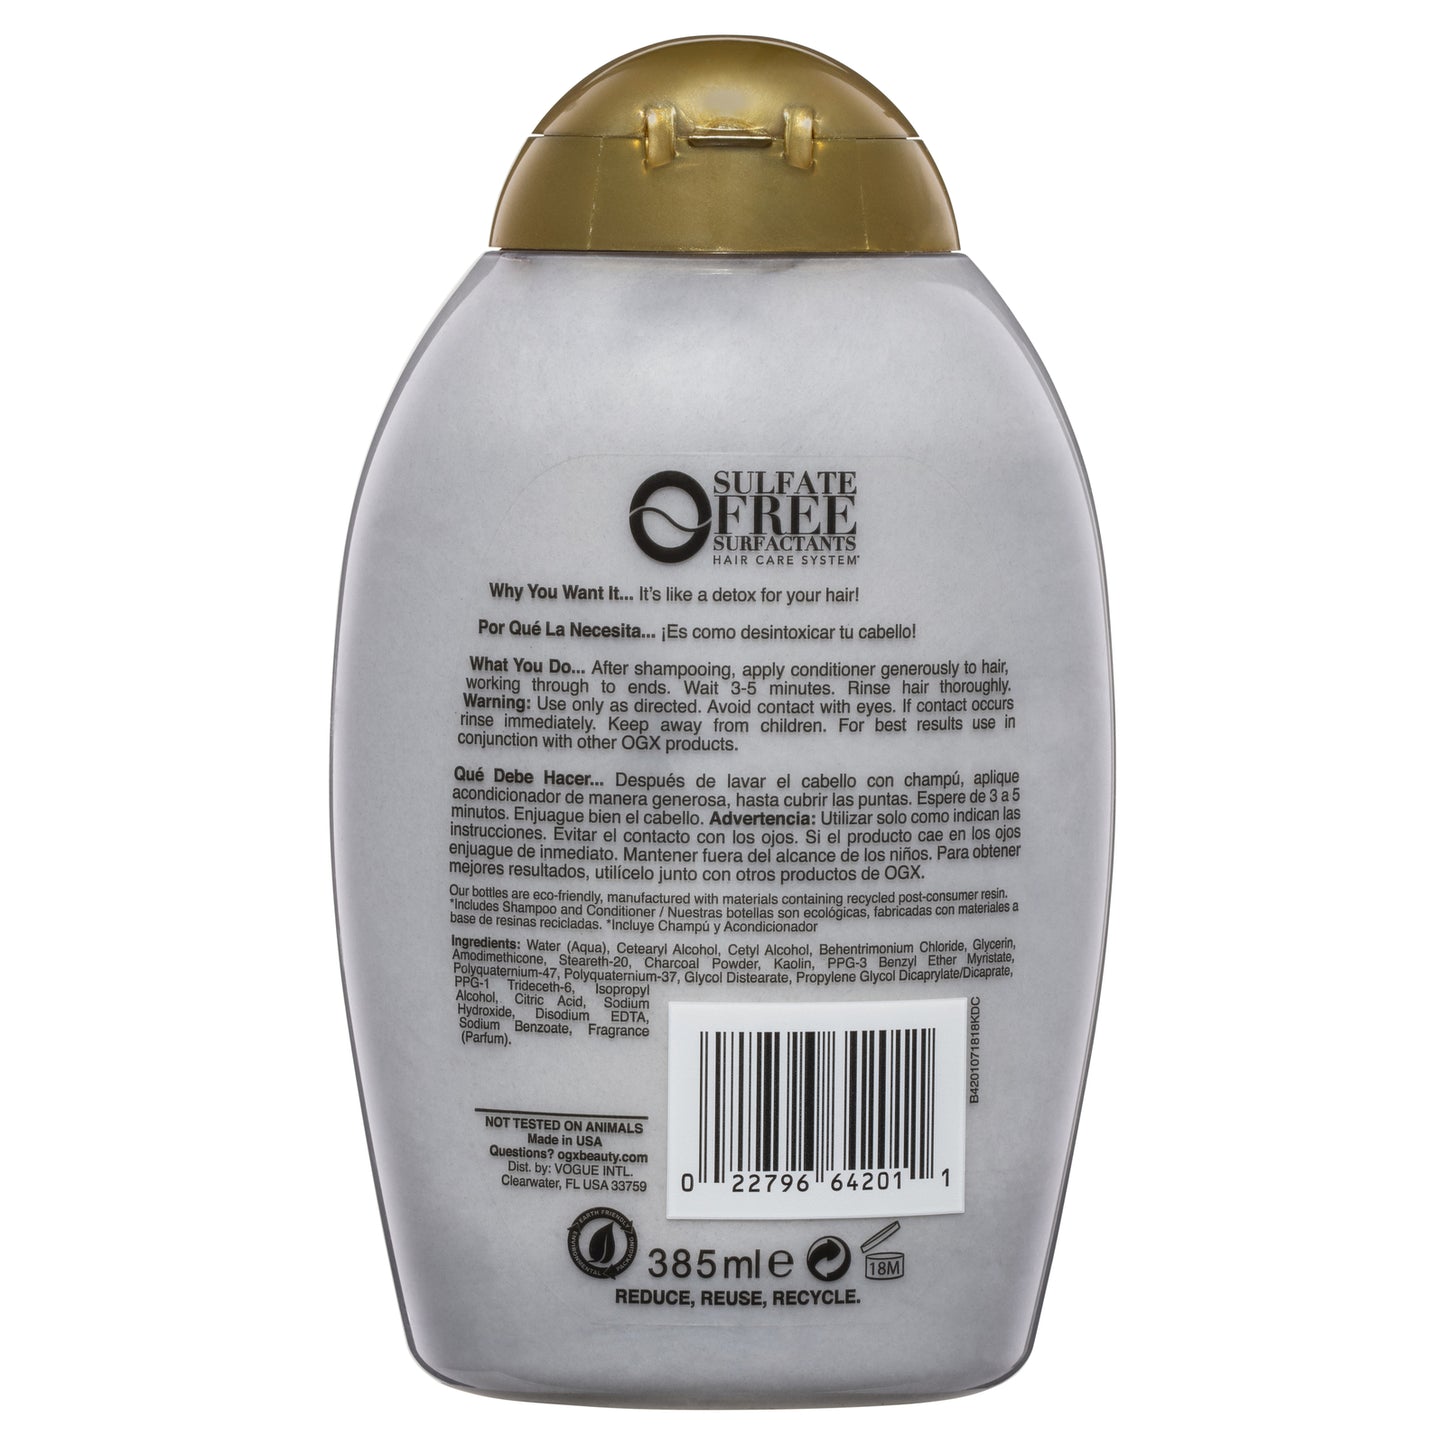 OGX Purifying + Charcoal Detox Conditioner 385mL